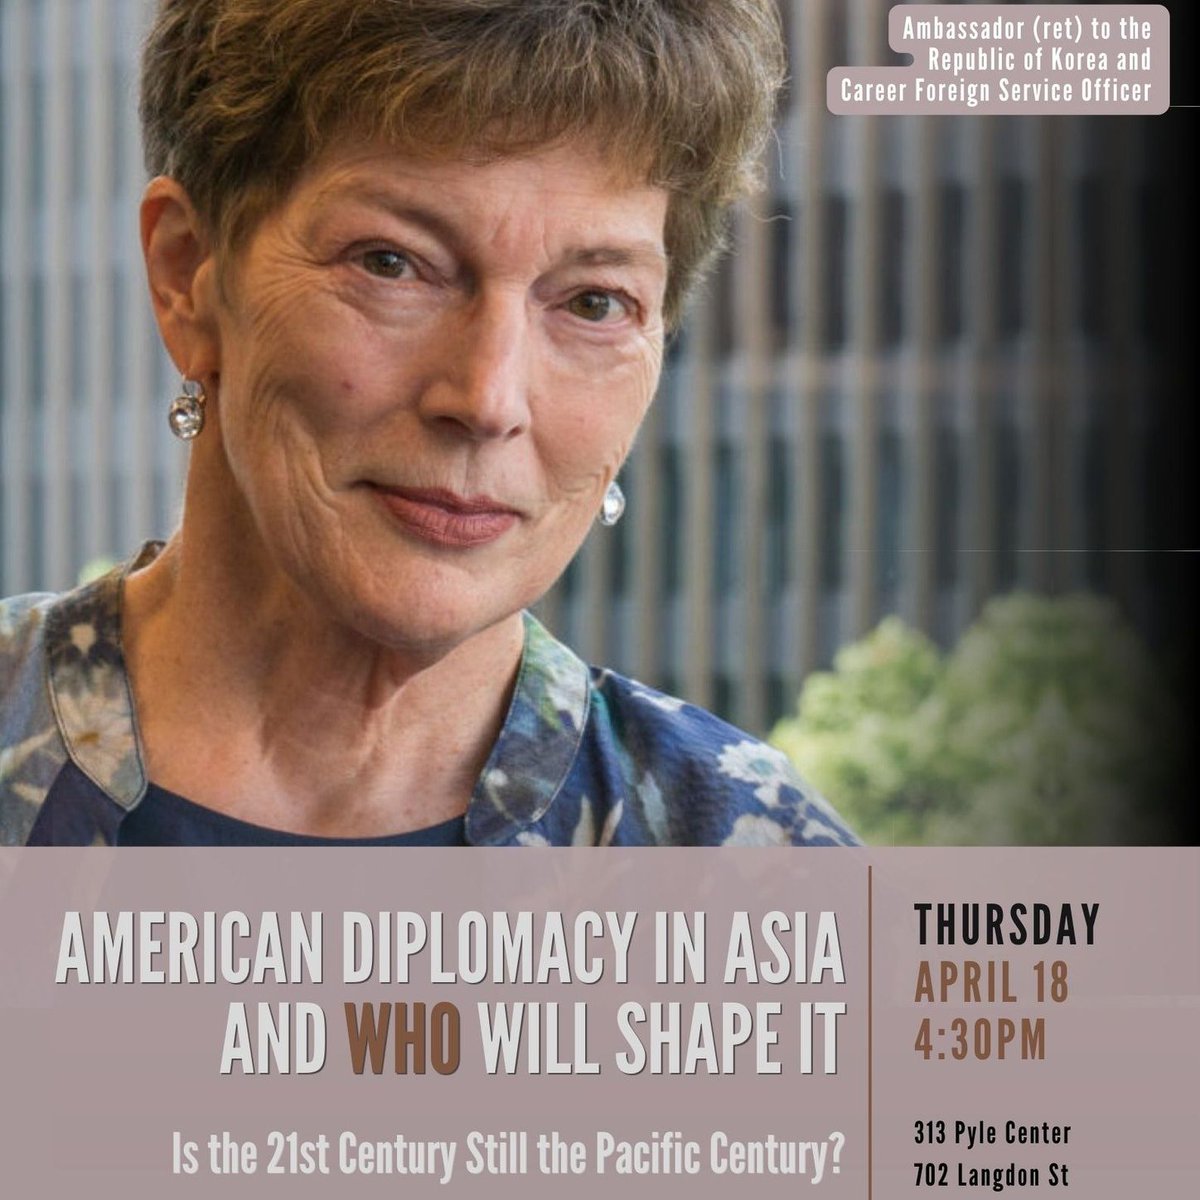 The Center for East Asian Studies will co-sponsor a talk by Kathleen Stephens: 'American Diplomacy in Asia and Who Will Shape It: Is the 21st Century Still the Pacific Century?' April 18 at 4:30pm CST. Register here: buff.ly/49niSzG